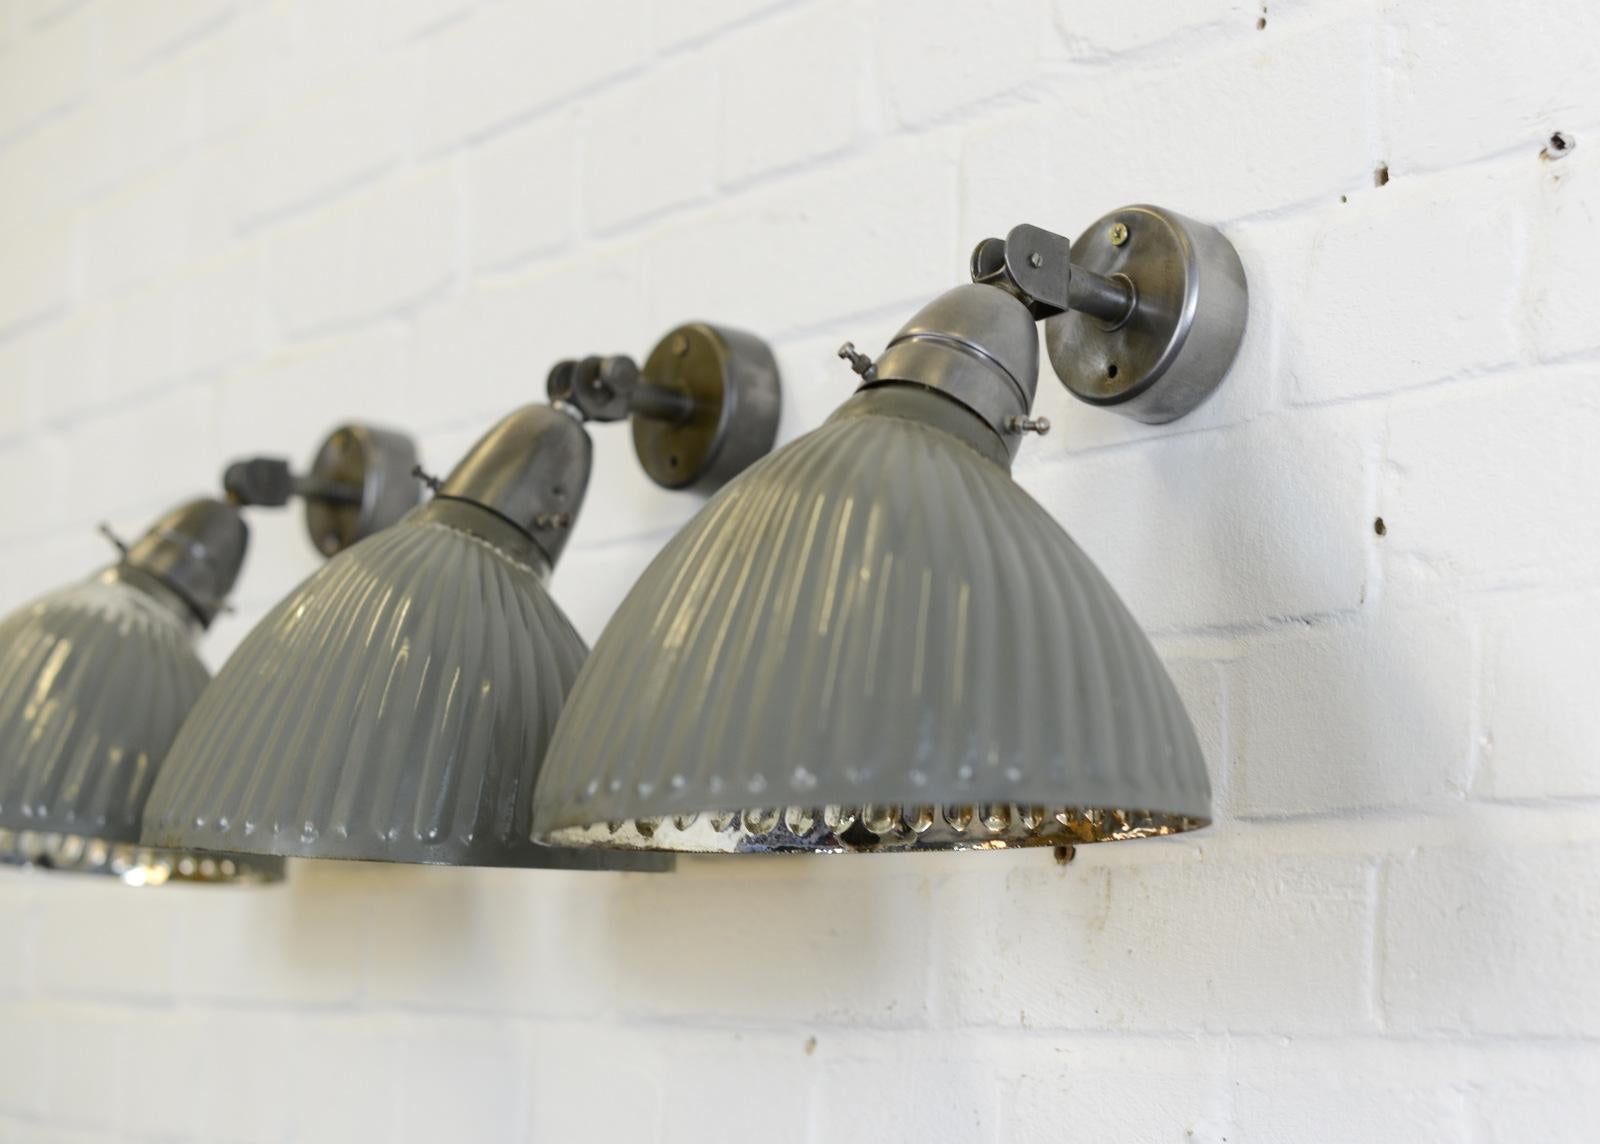 Wall-mounted light grey mercury glass lights, 1930s.

- Price is per light
- Original light grey outer paint
- Mercury glass inner reflectors
- Articulated arm
- Takes E27 fitting bulbs
- The lights wire directly into the wall
- Czech,